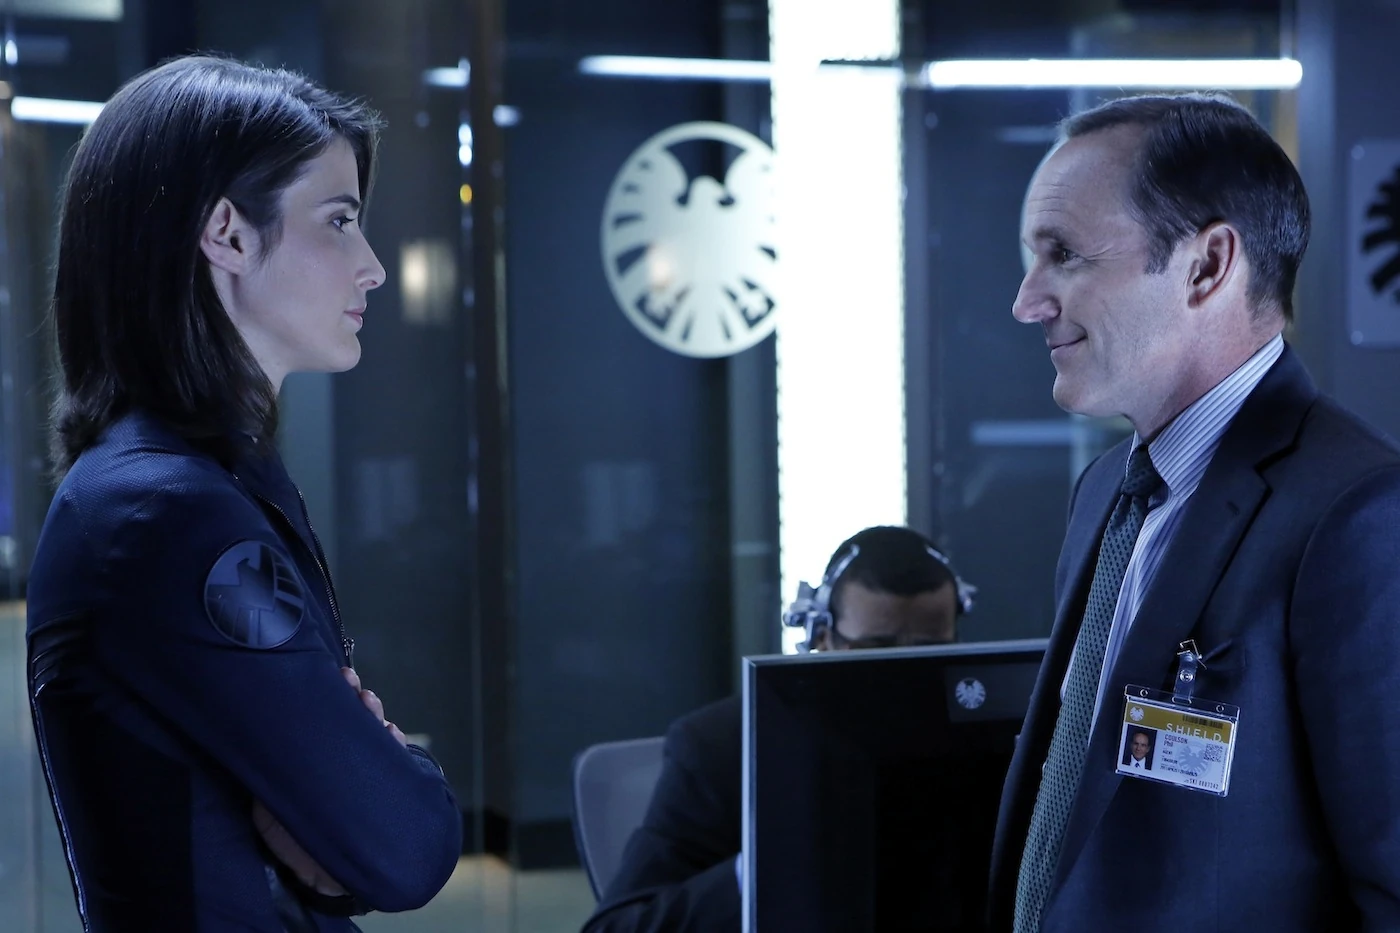 Clark Gregg and Cobie Smulders in Agents of S.H.I.E.L.D.